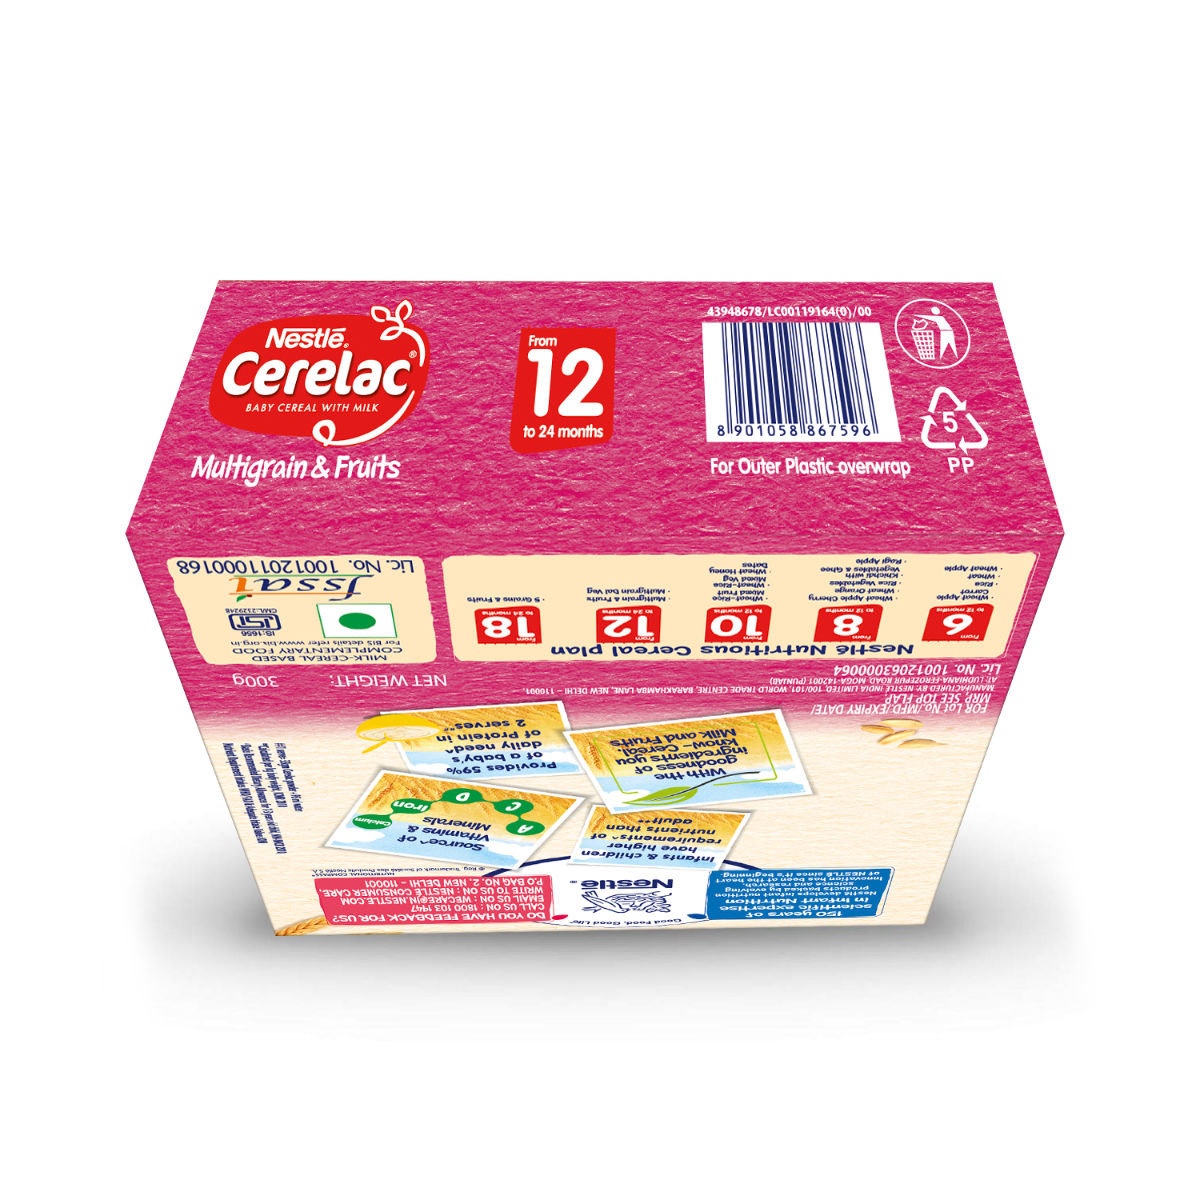 Nestle Cerelac Multigrain & Fruits Baby Cereal, 12 to 24 Months, 300 gm Refill Pack, Pack of 1 